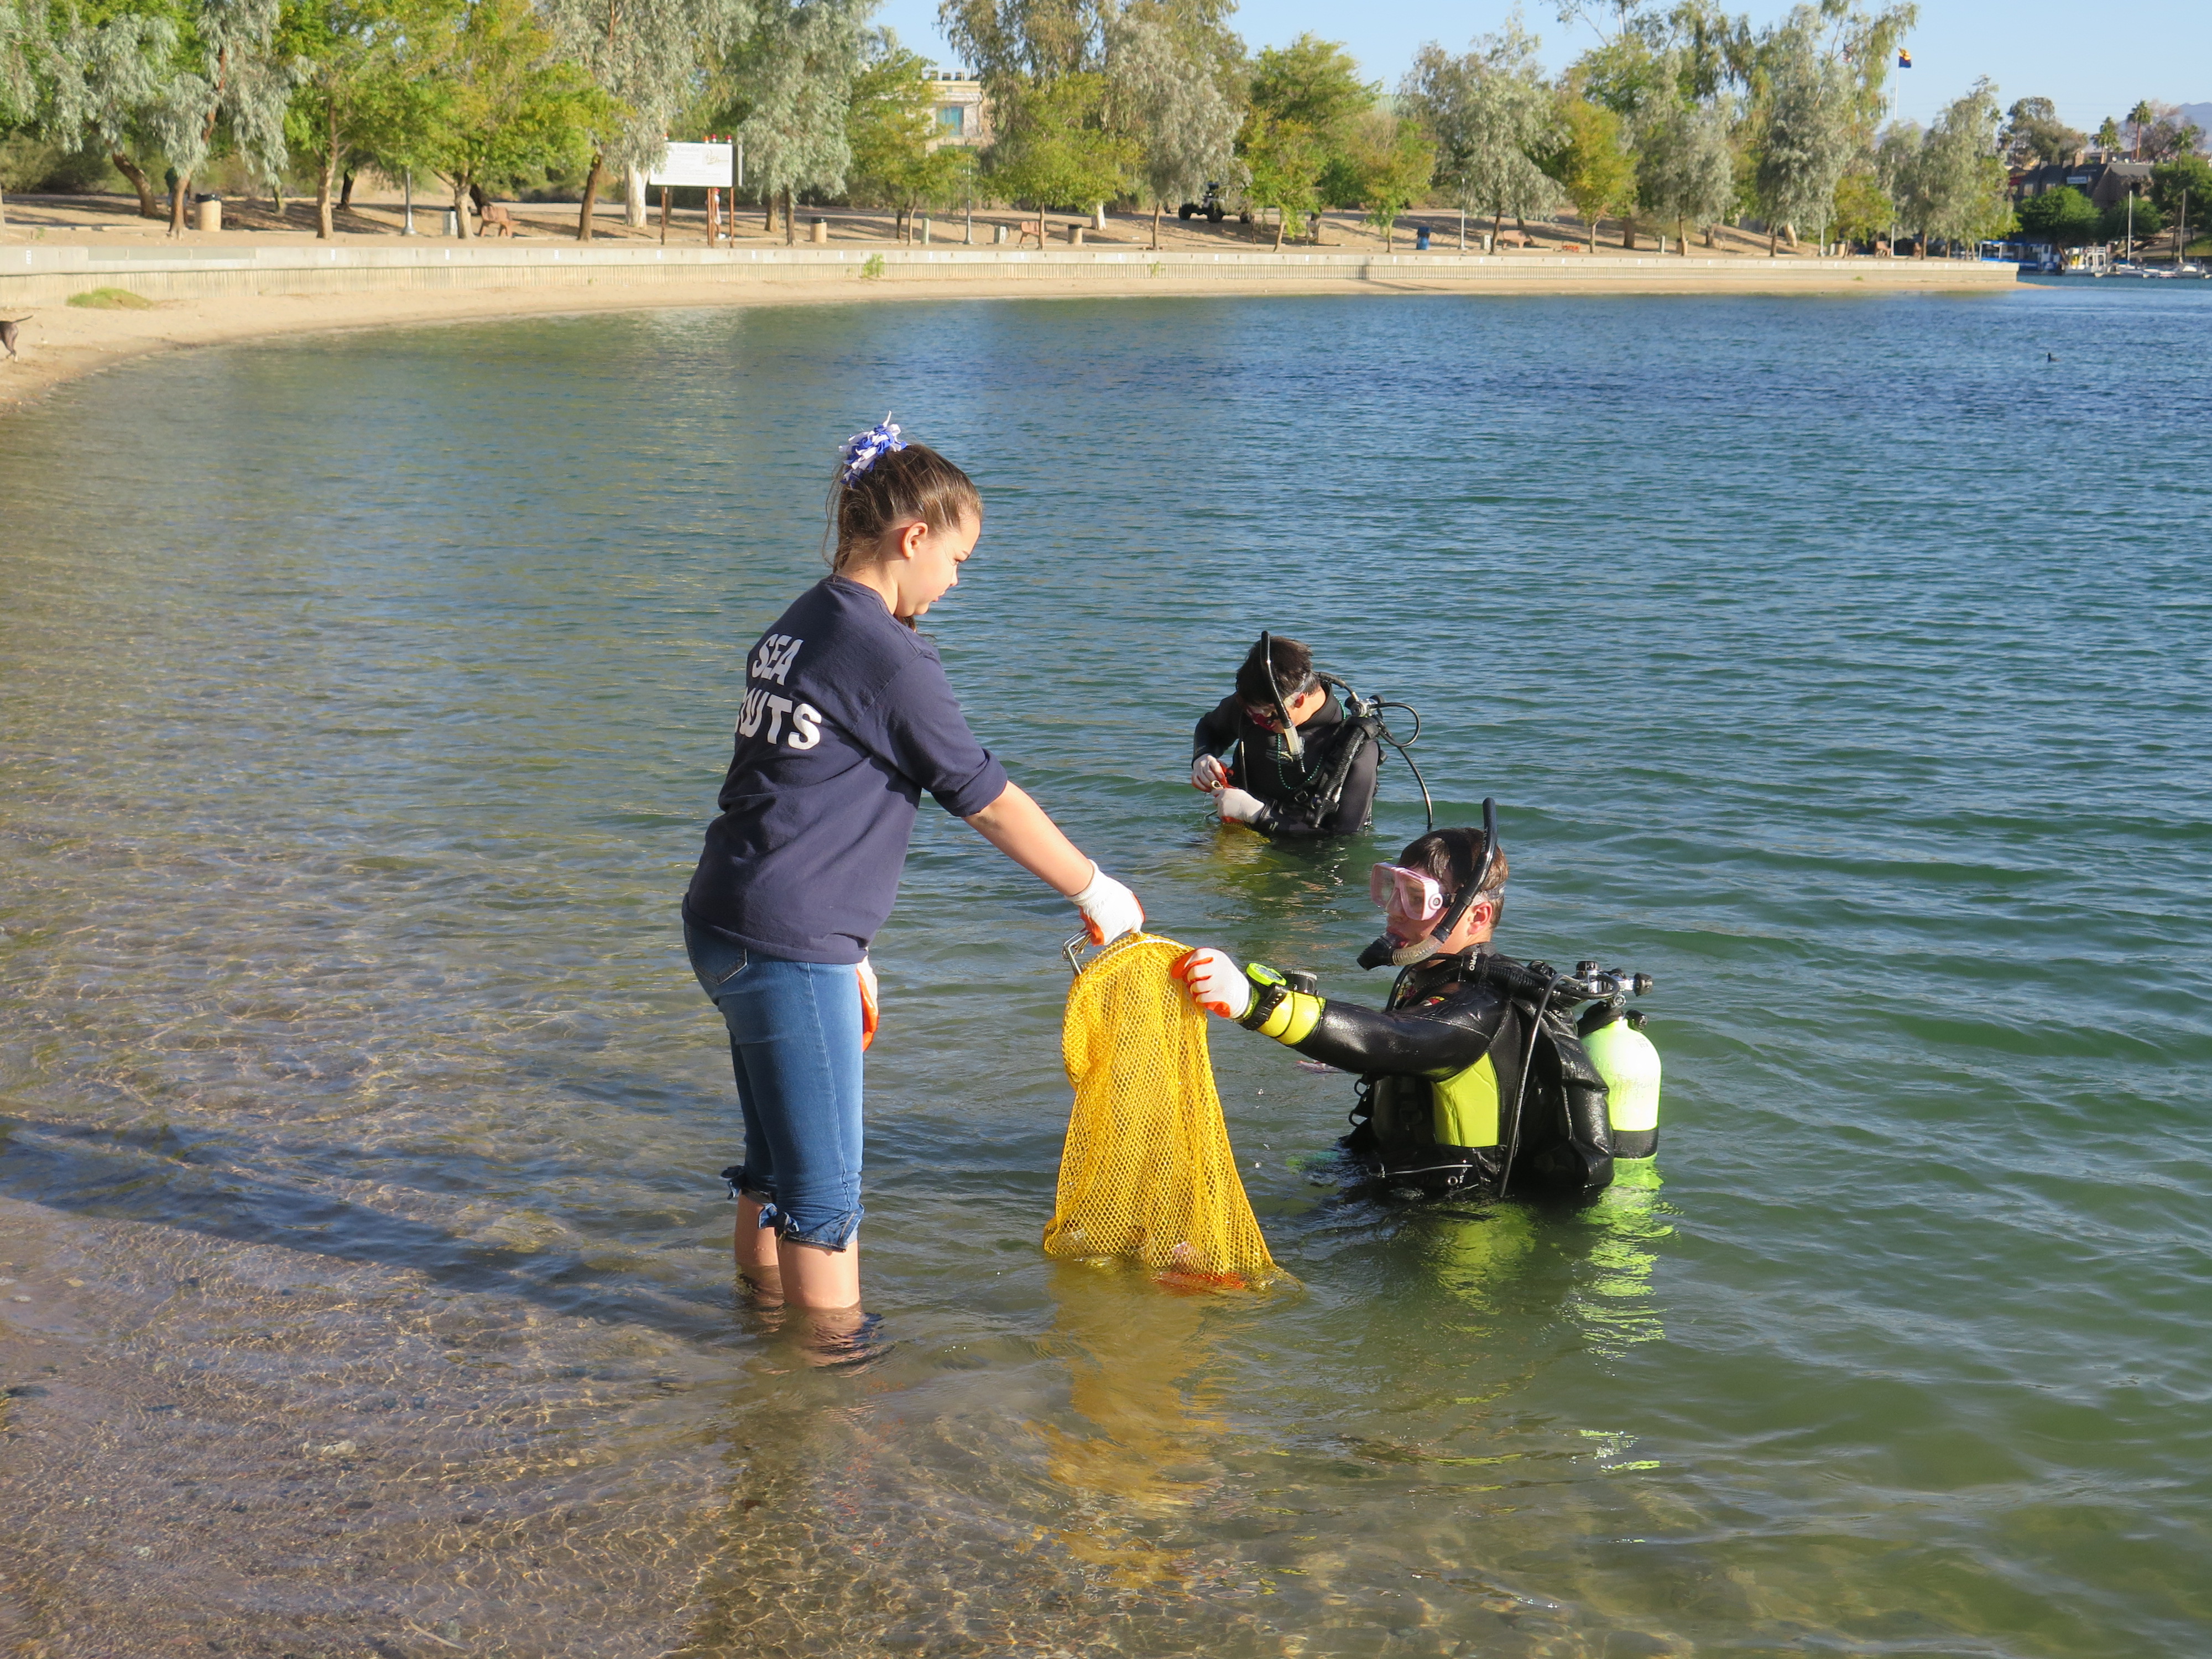 10th Annual Under The Bridge Underwater Cleanup Nets Dubious Treasures